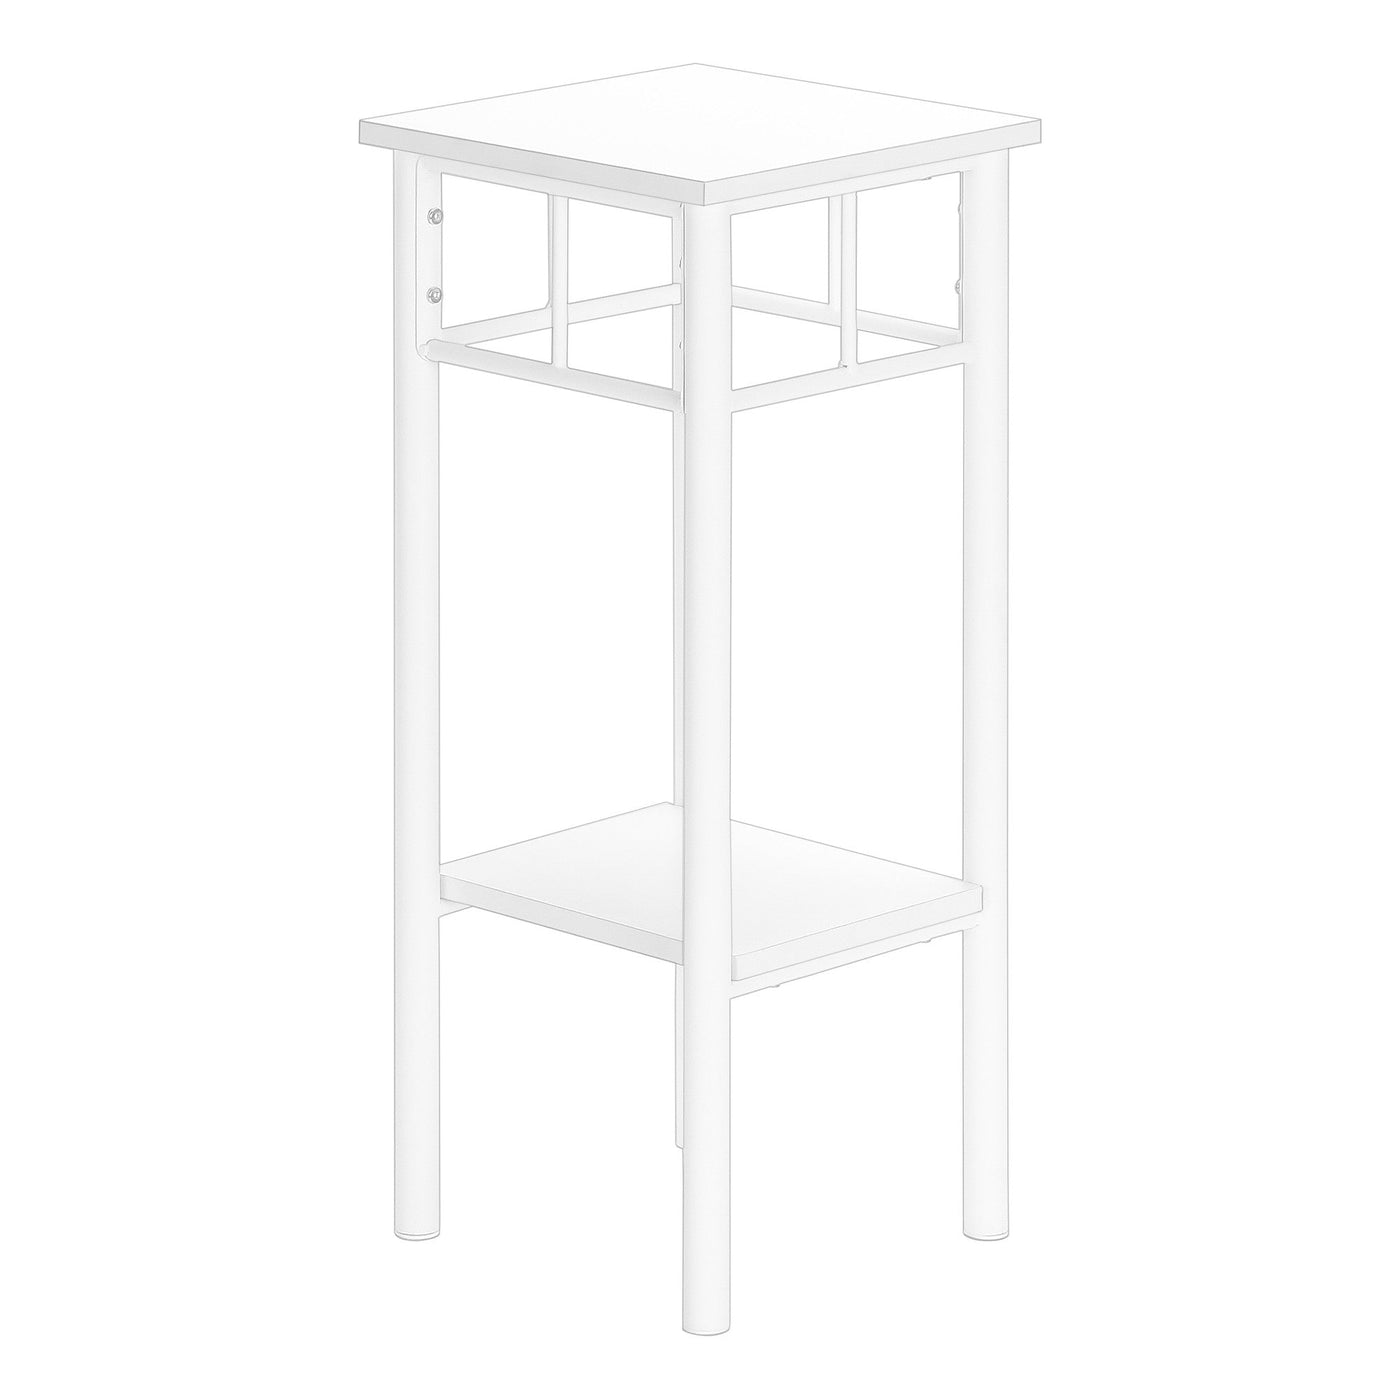 28’ White End Table With Shelf - End-Side Tables